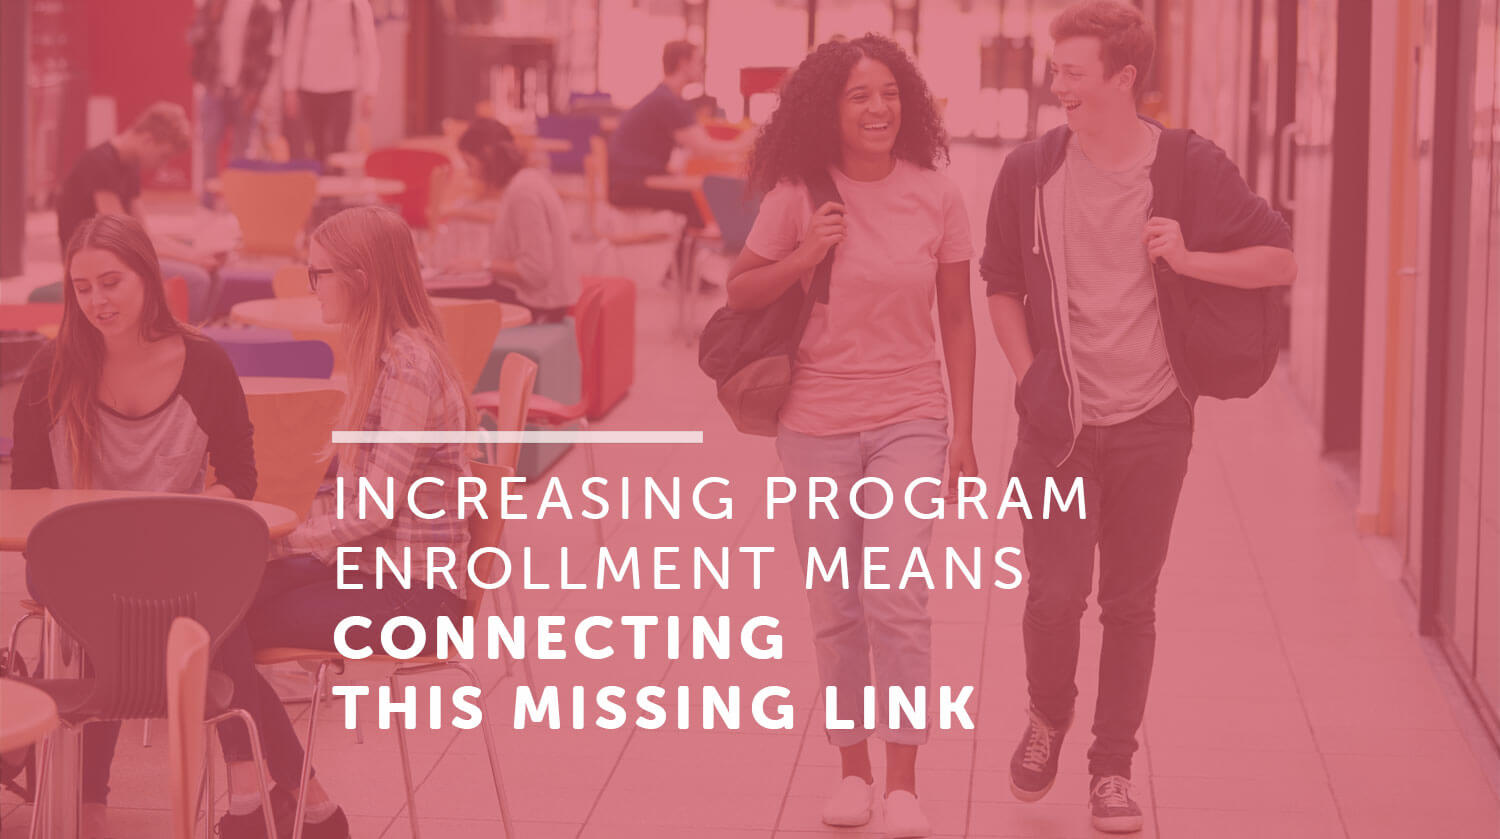 Increasing Program Enrollment Means Connecting This Missing Link